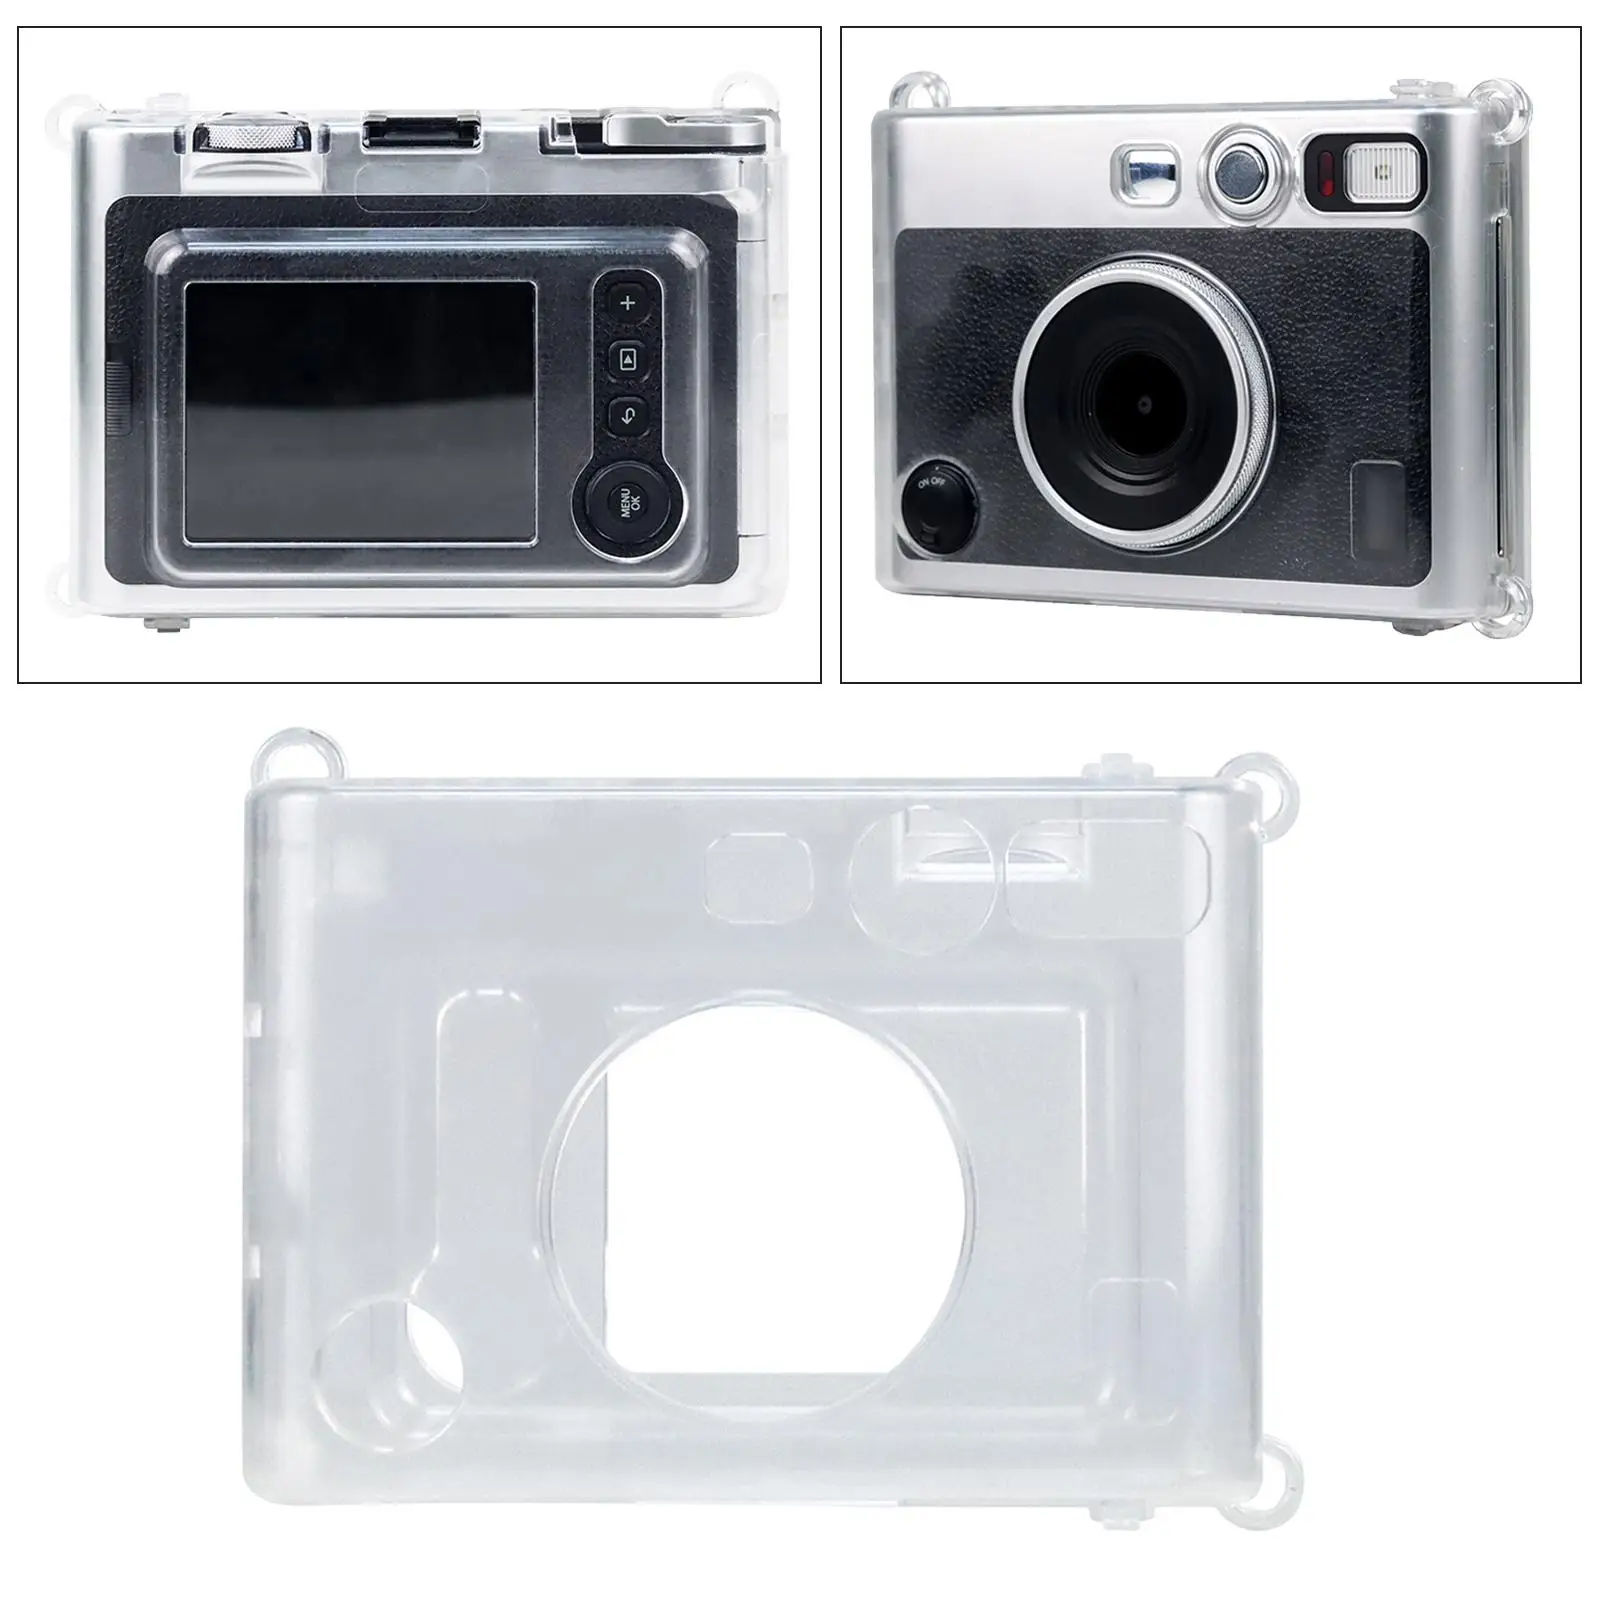  Protective Shell Accessories ,Supplies ,PVC,  Stabilization ,Storage Case Cover for  Cameras ,Holiday Travel